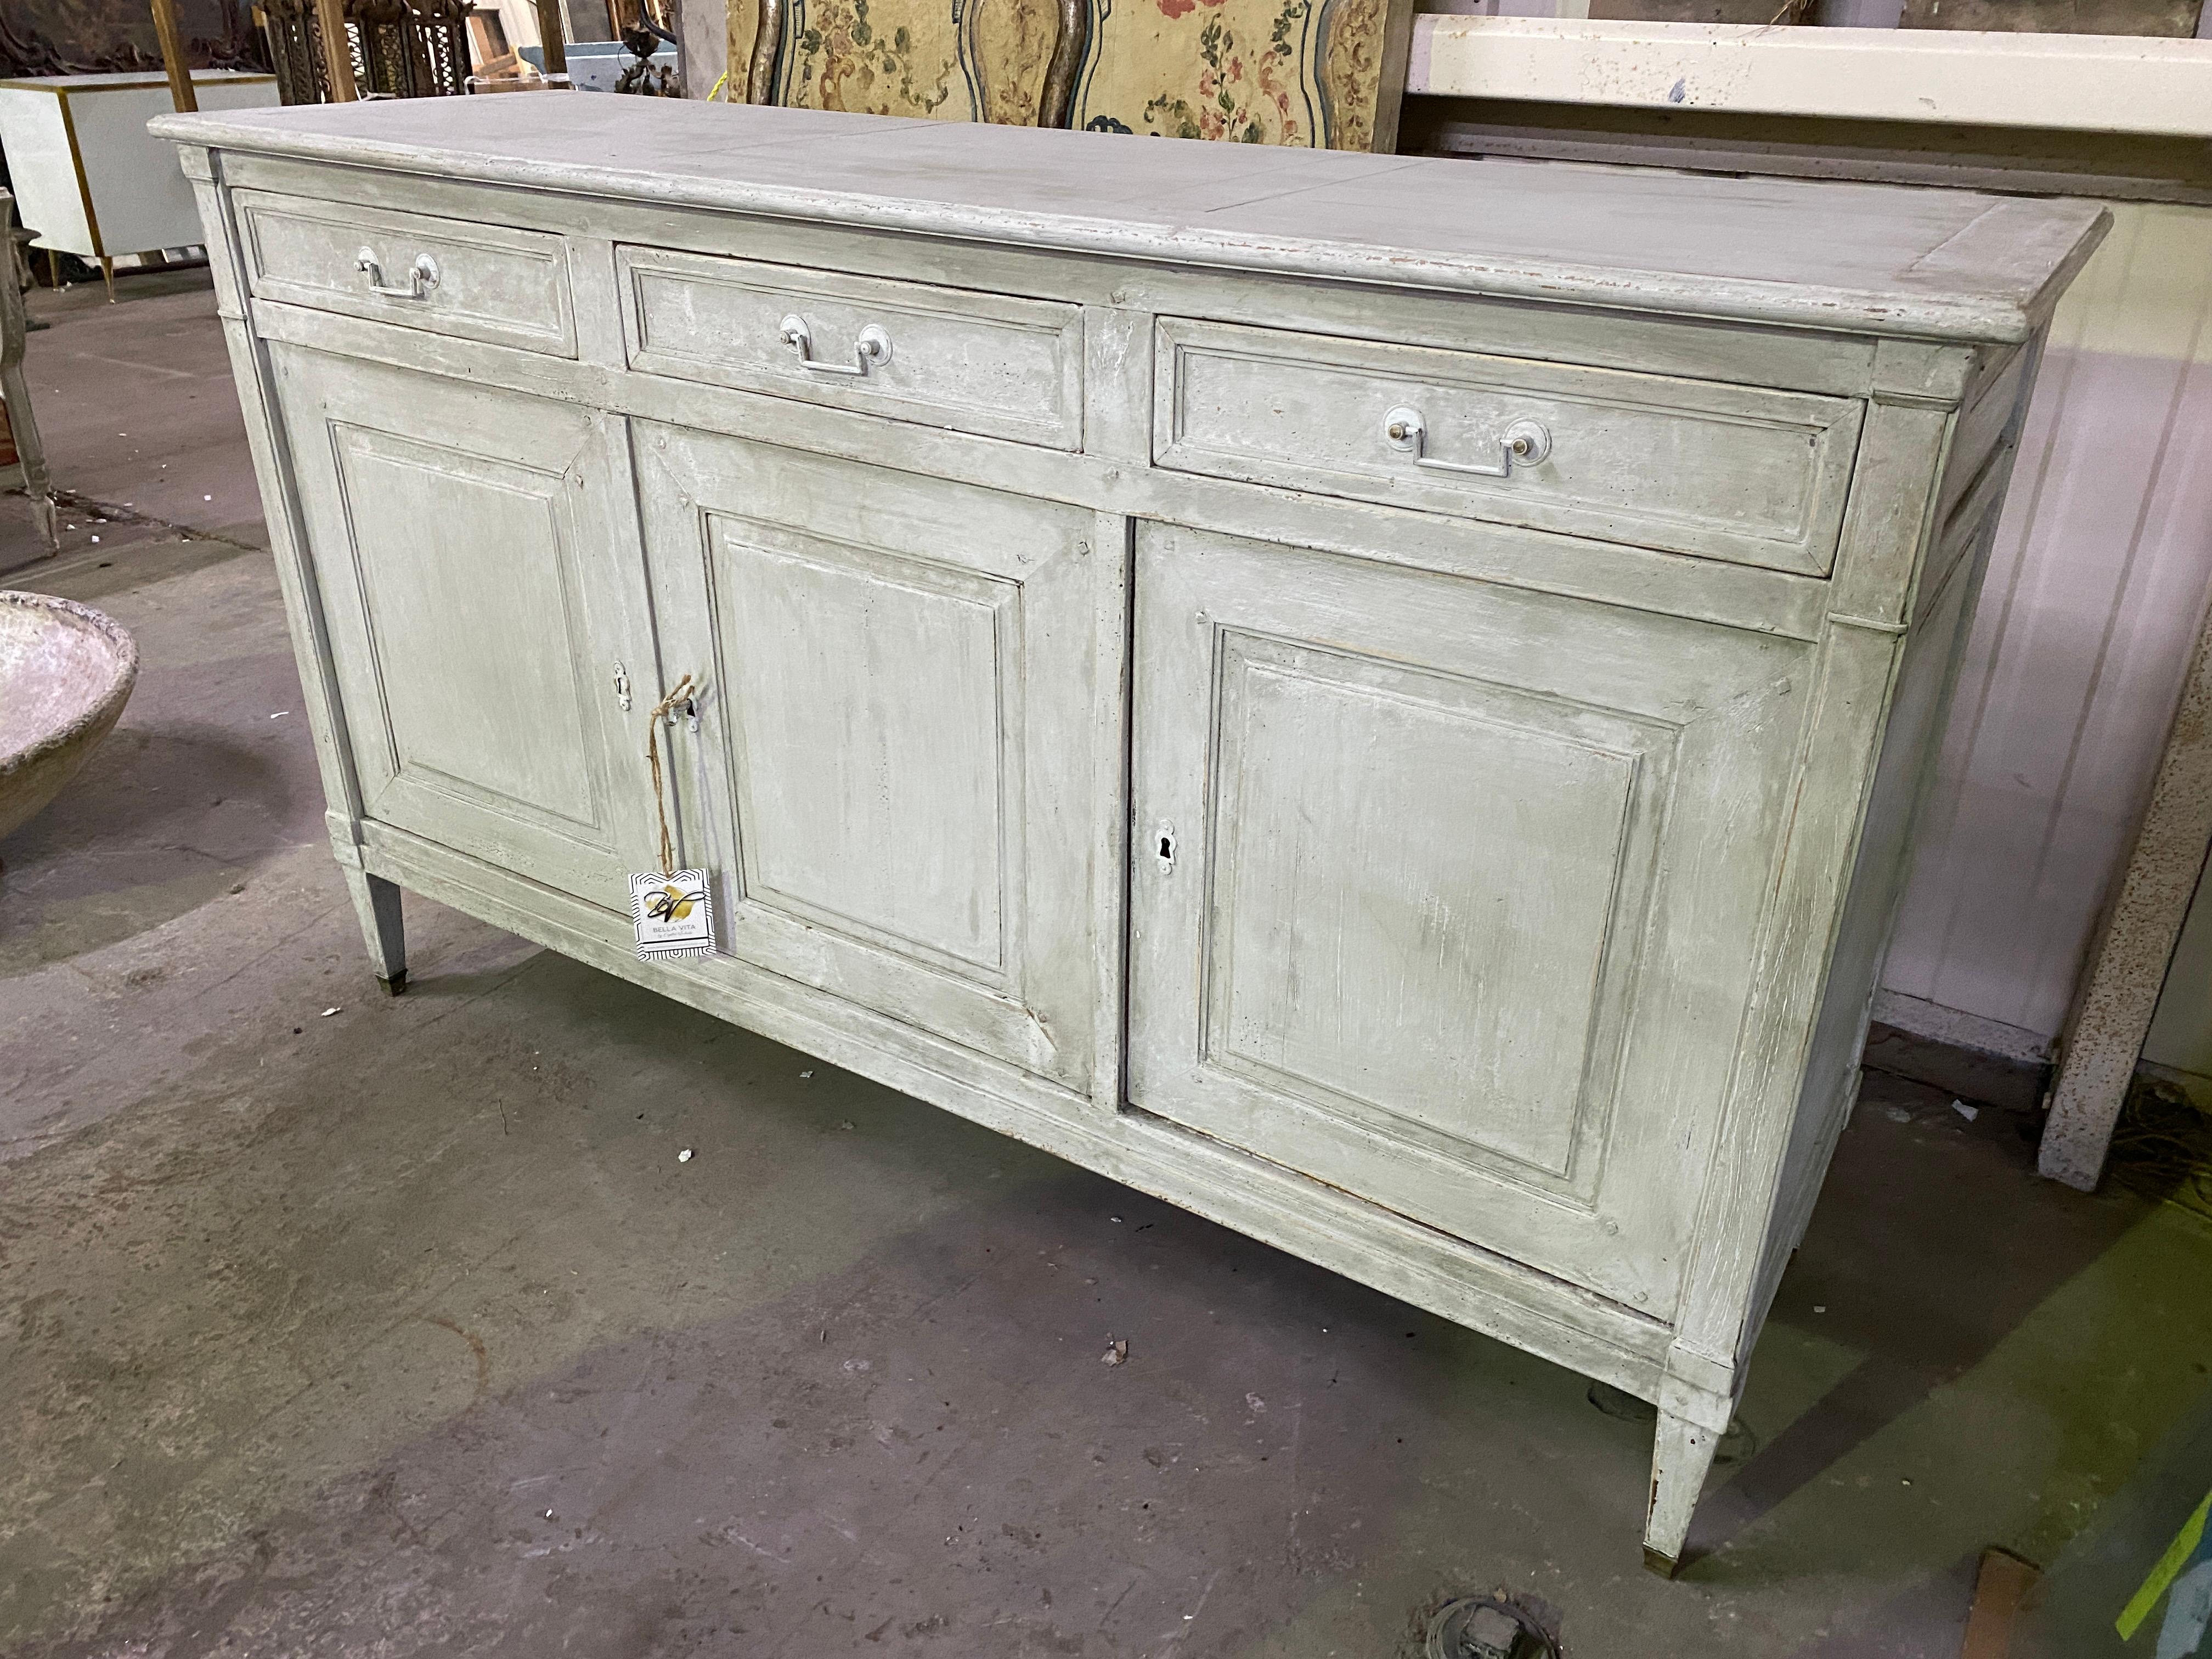 Beautiful imported credenza from France painted in a beautiful neutral tone. Perfect for any design space whether it be in a dining room, entry way or living room with a beautiful painting or mirror above it with decorative objects sitting atop.